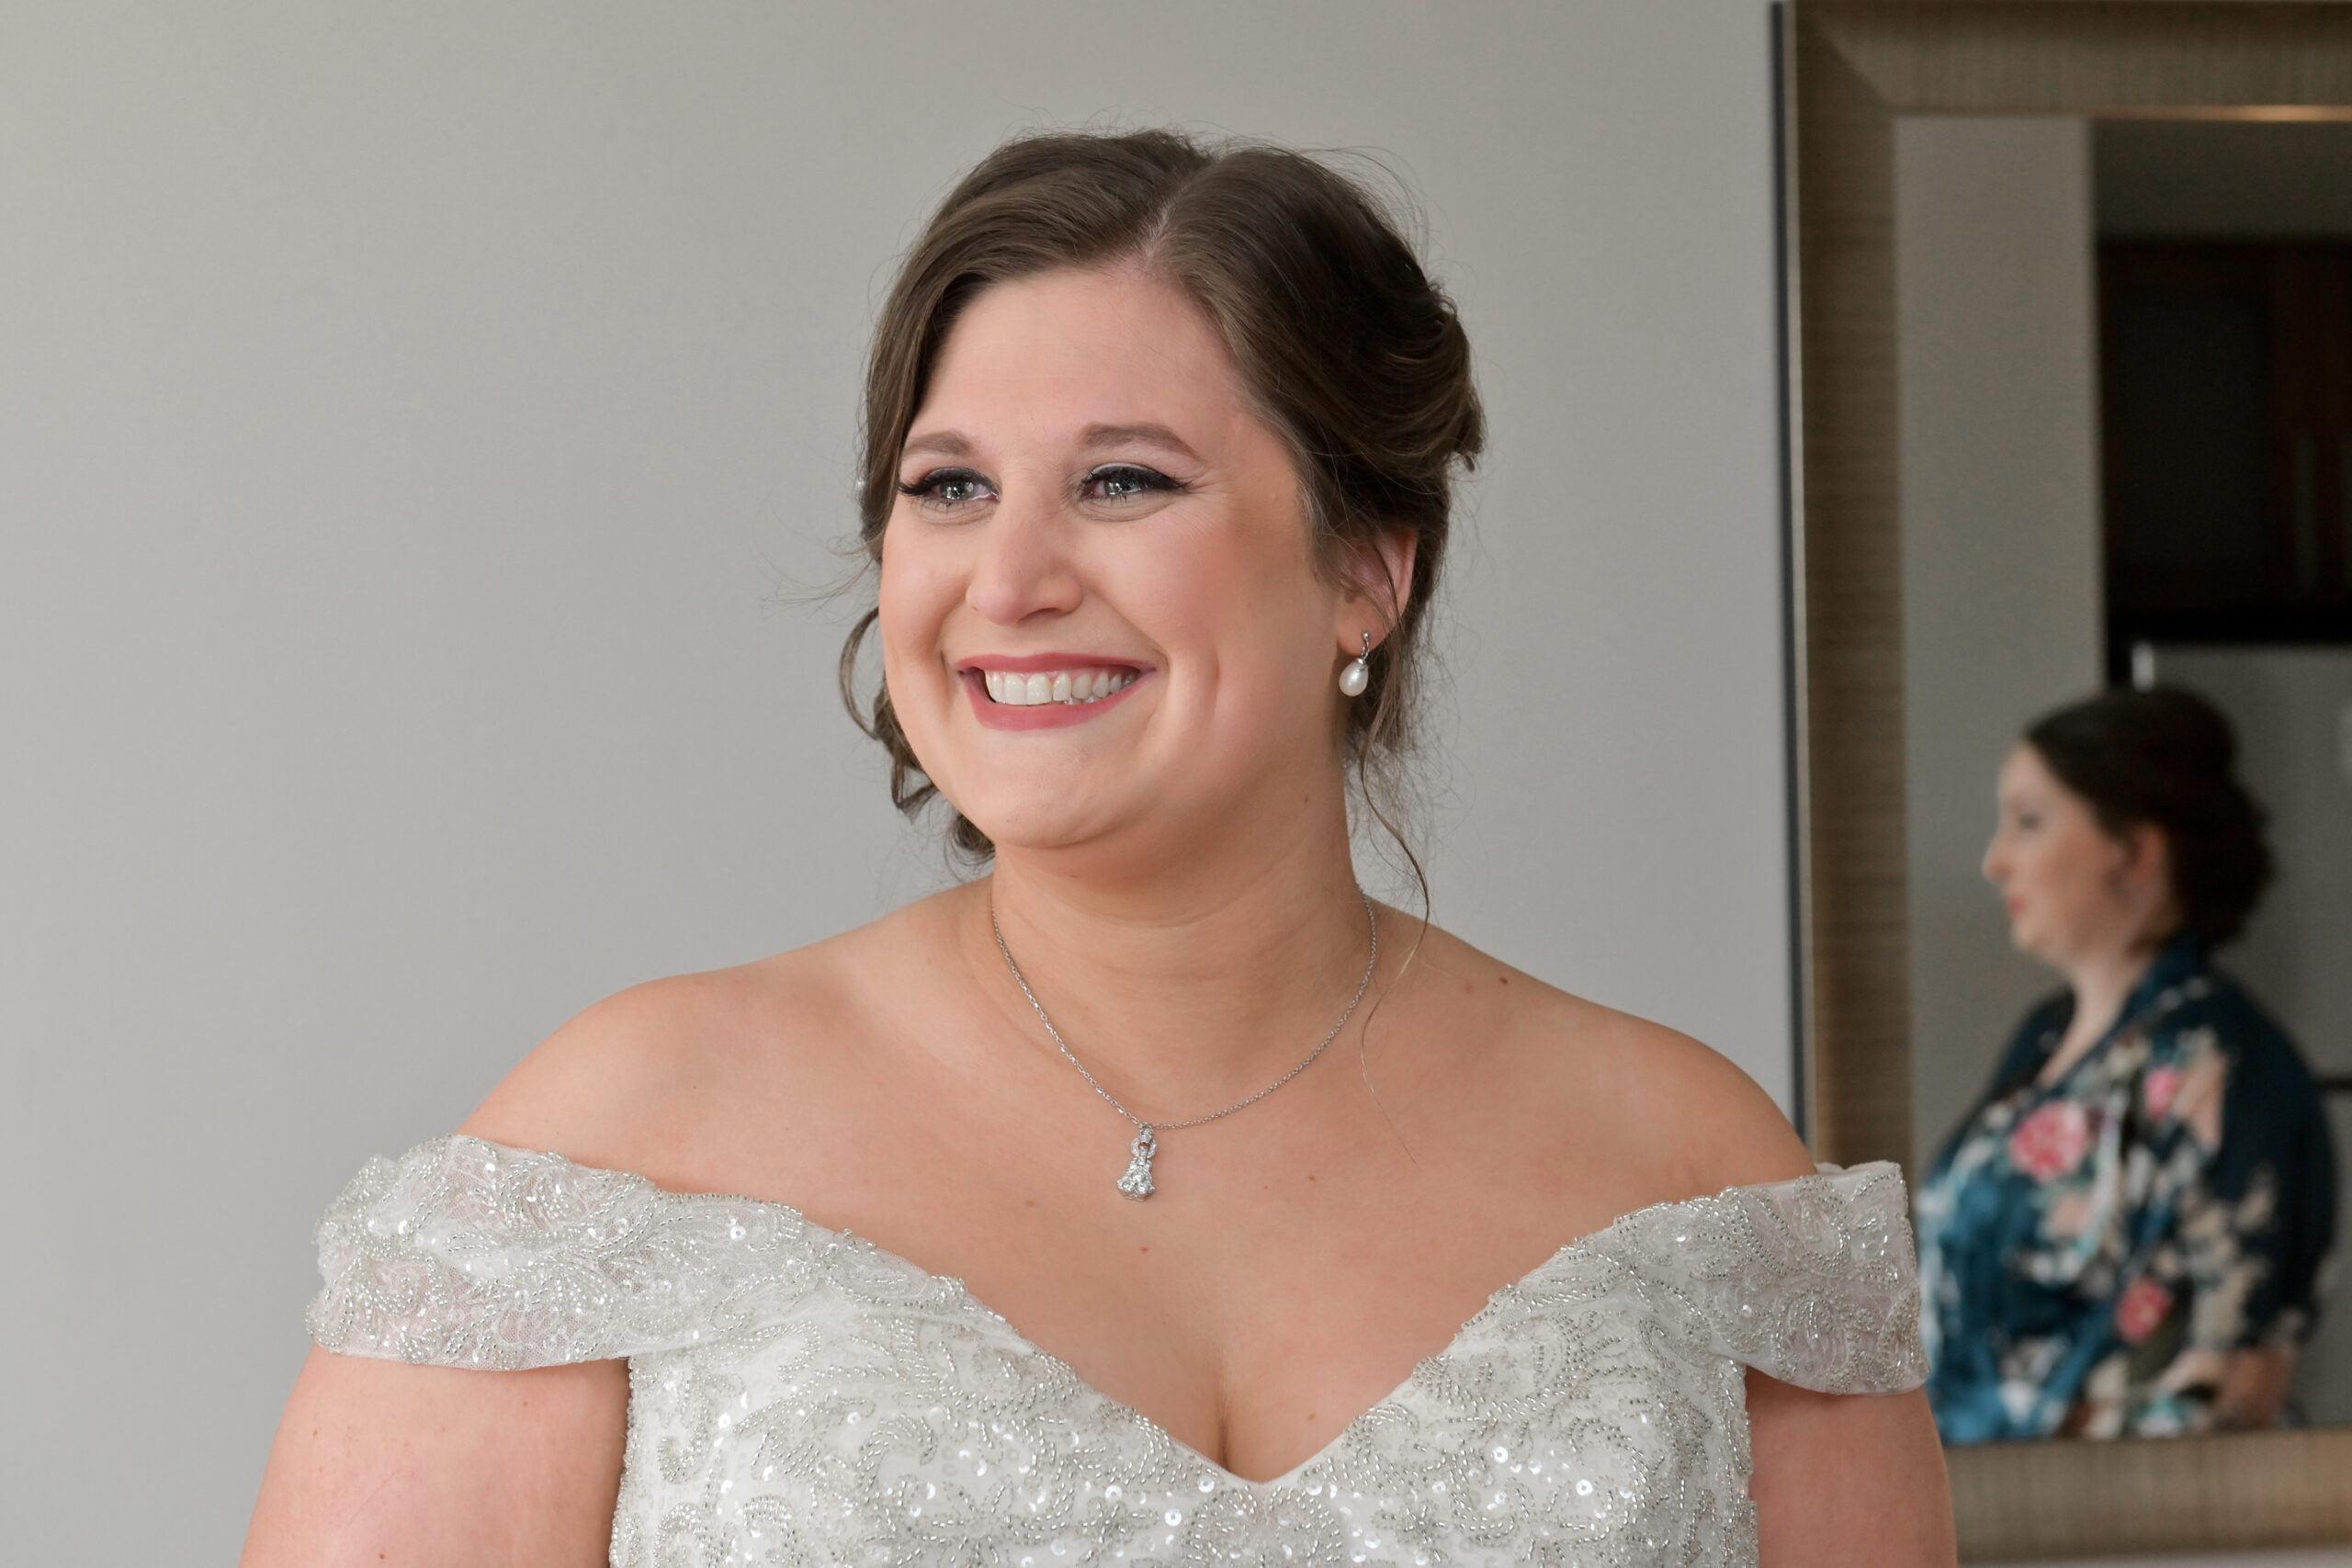 Bride burst into tears while getting ready for her wedding